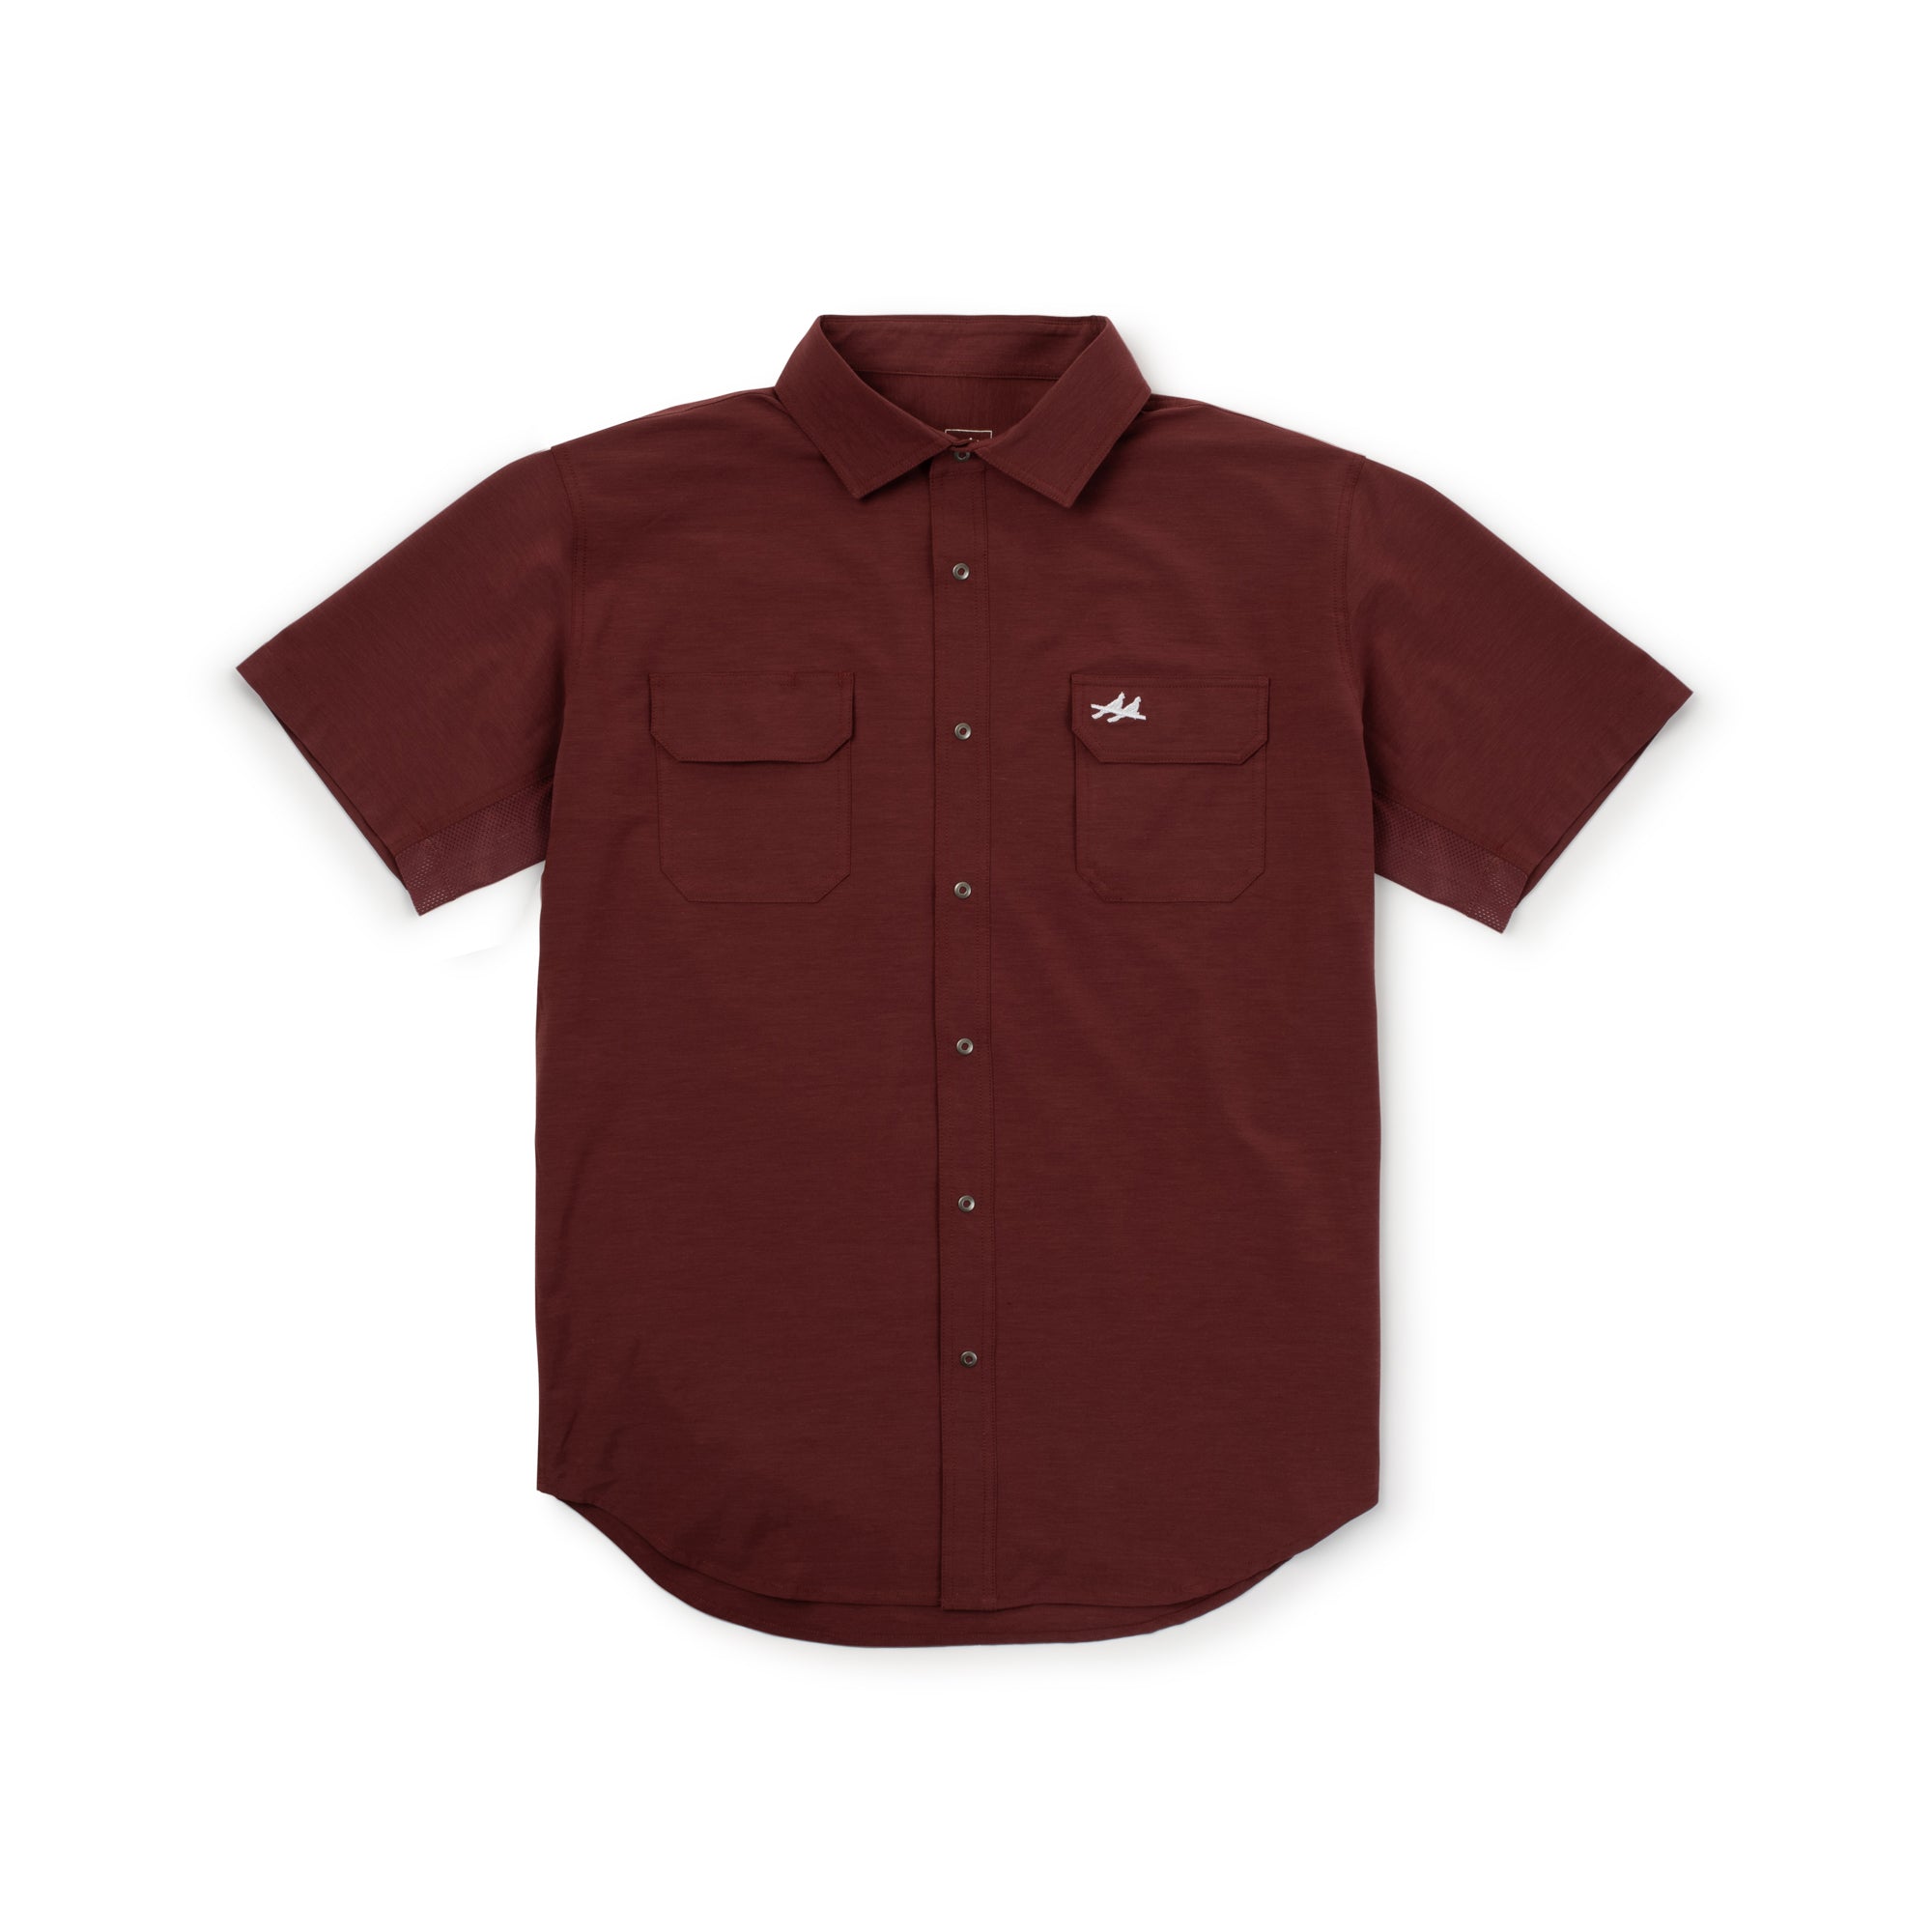 The Rio Ultimate Outdoor Blend Short Sleeve - Maroon M